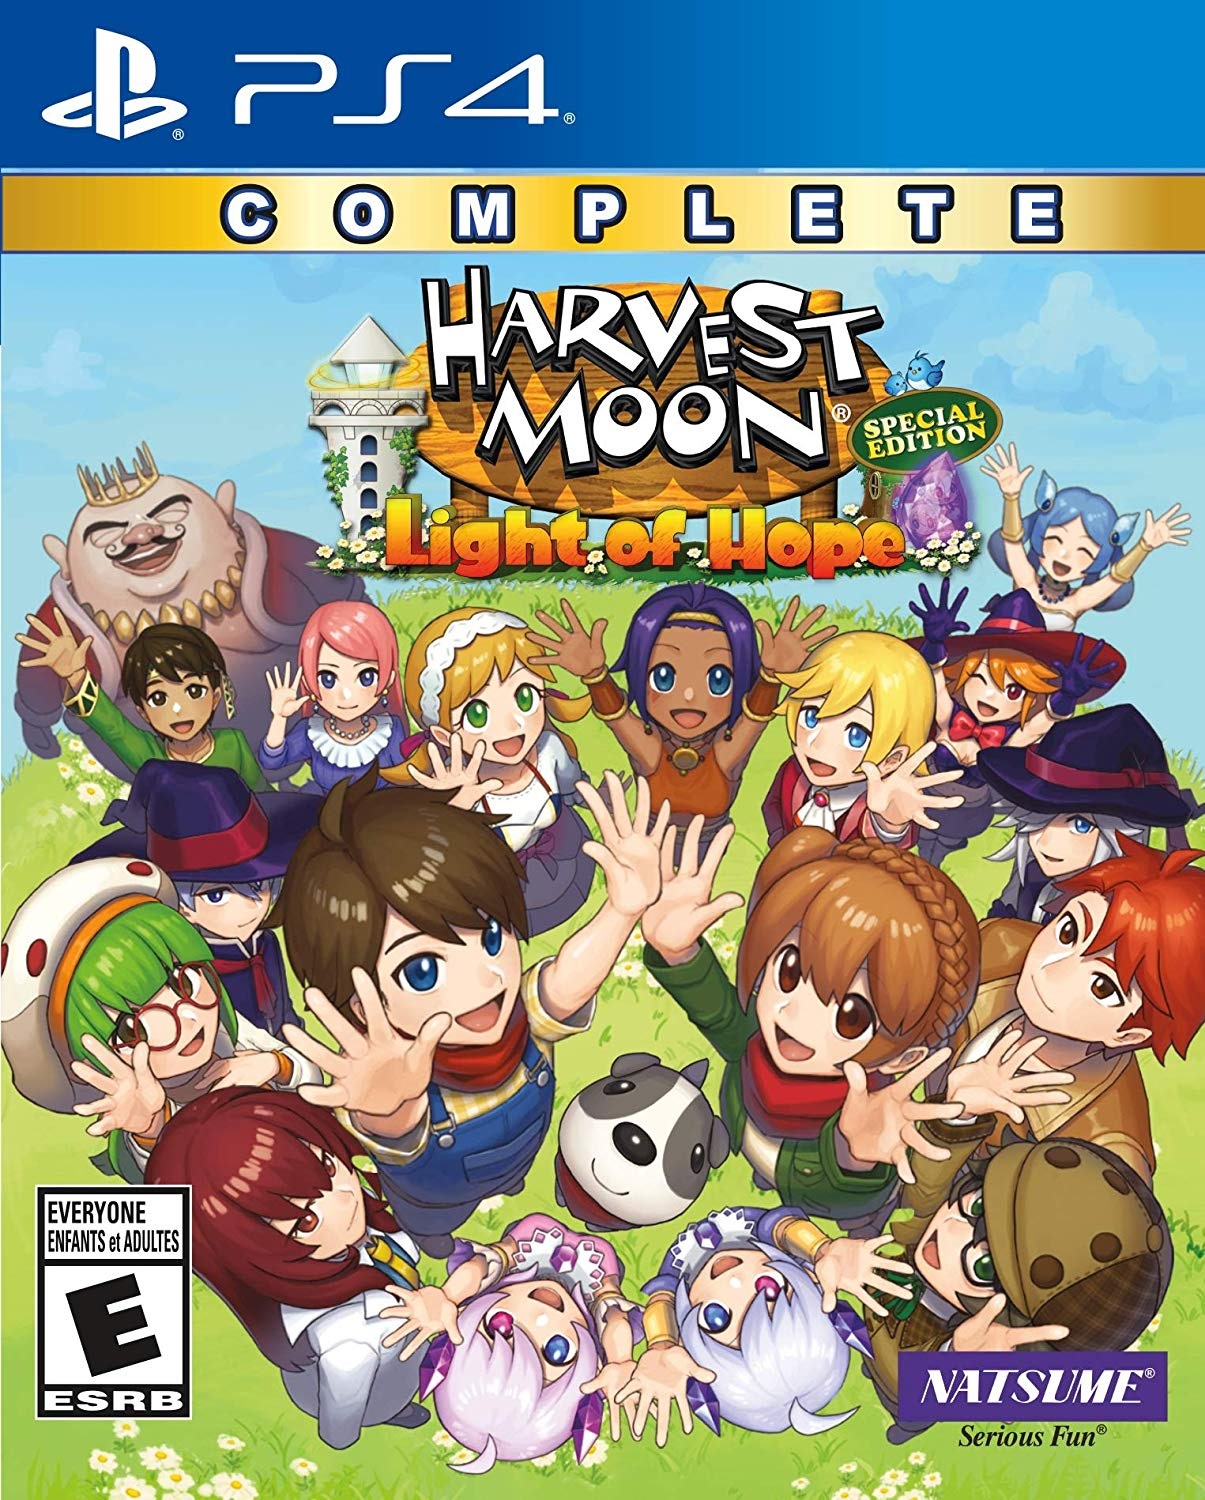 PS4 HARVEST MOON: LIGHT OF HOPE COMPLETE ED / -PS4 HARVEST MOON: LIGHT OF HOPE COMPLETE ED / 